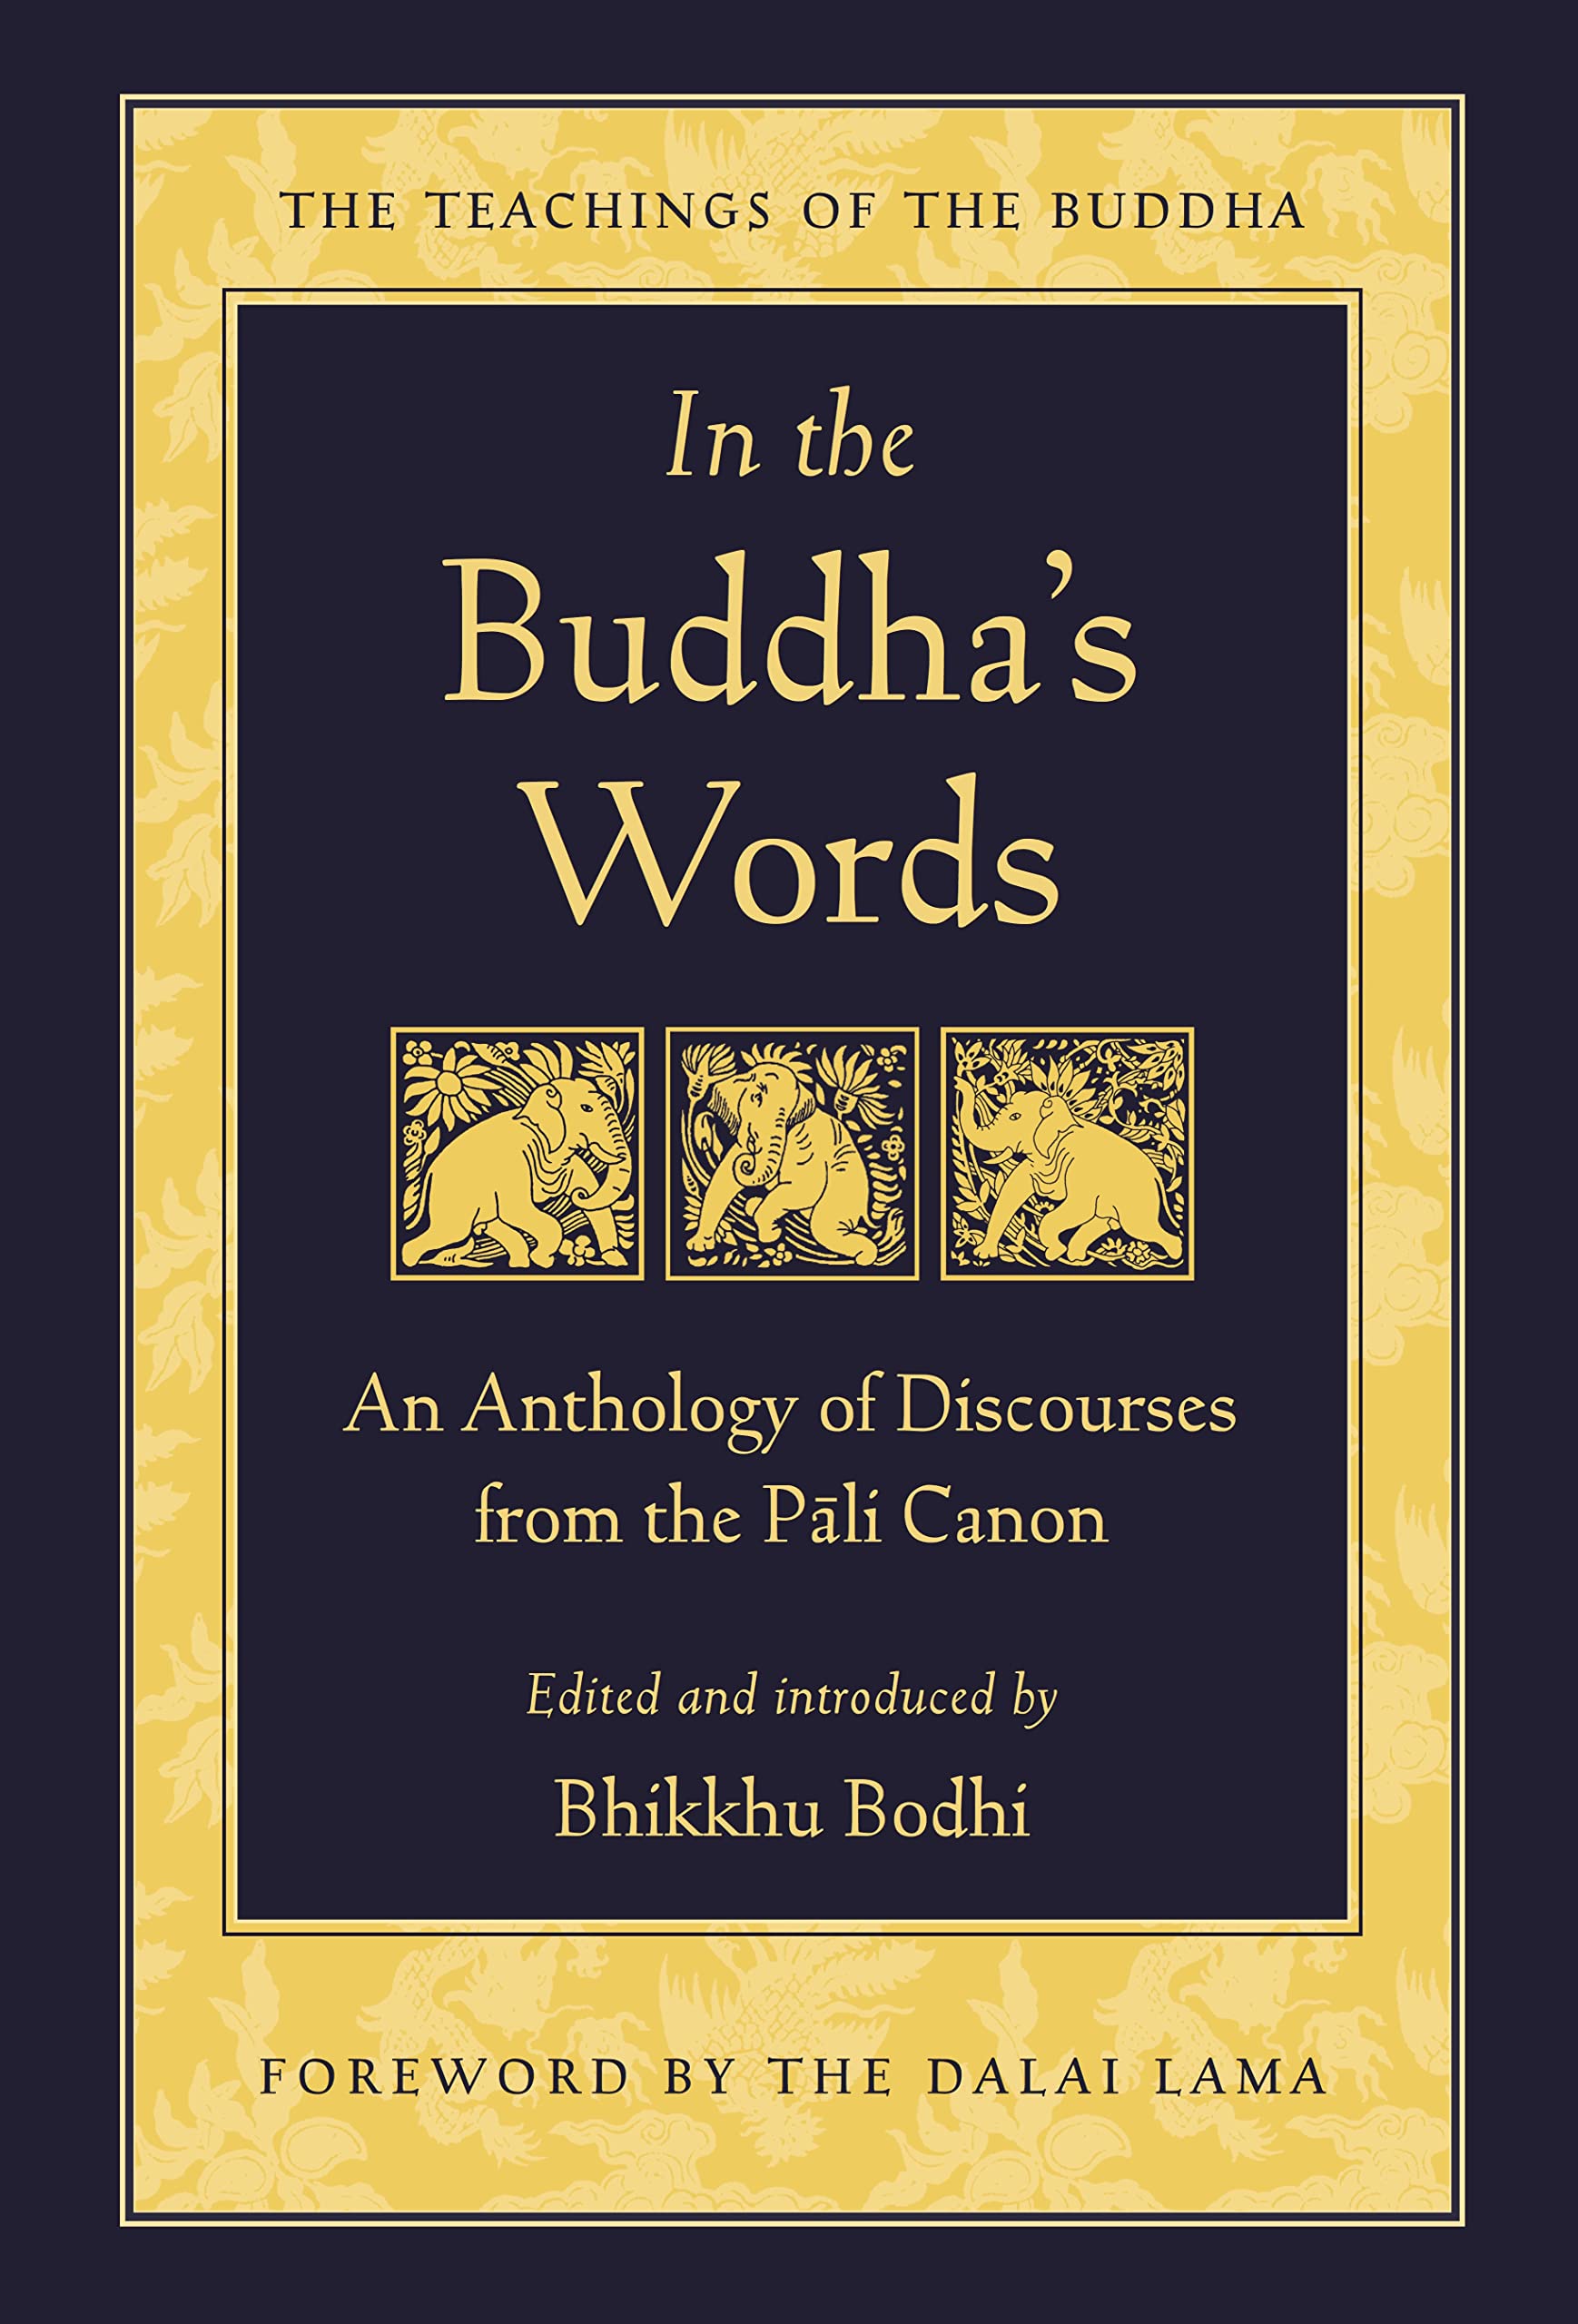 In The Buddha's Words: An Anthology of Discourses from the Pali Canon